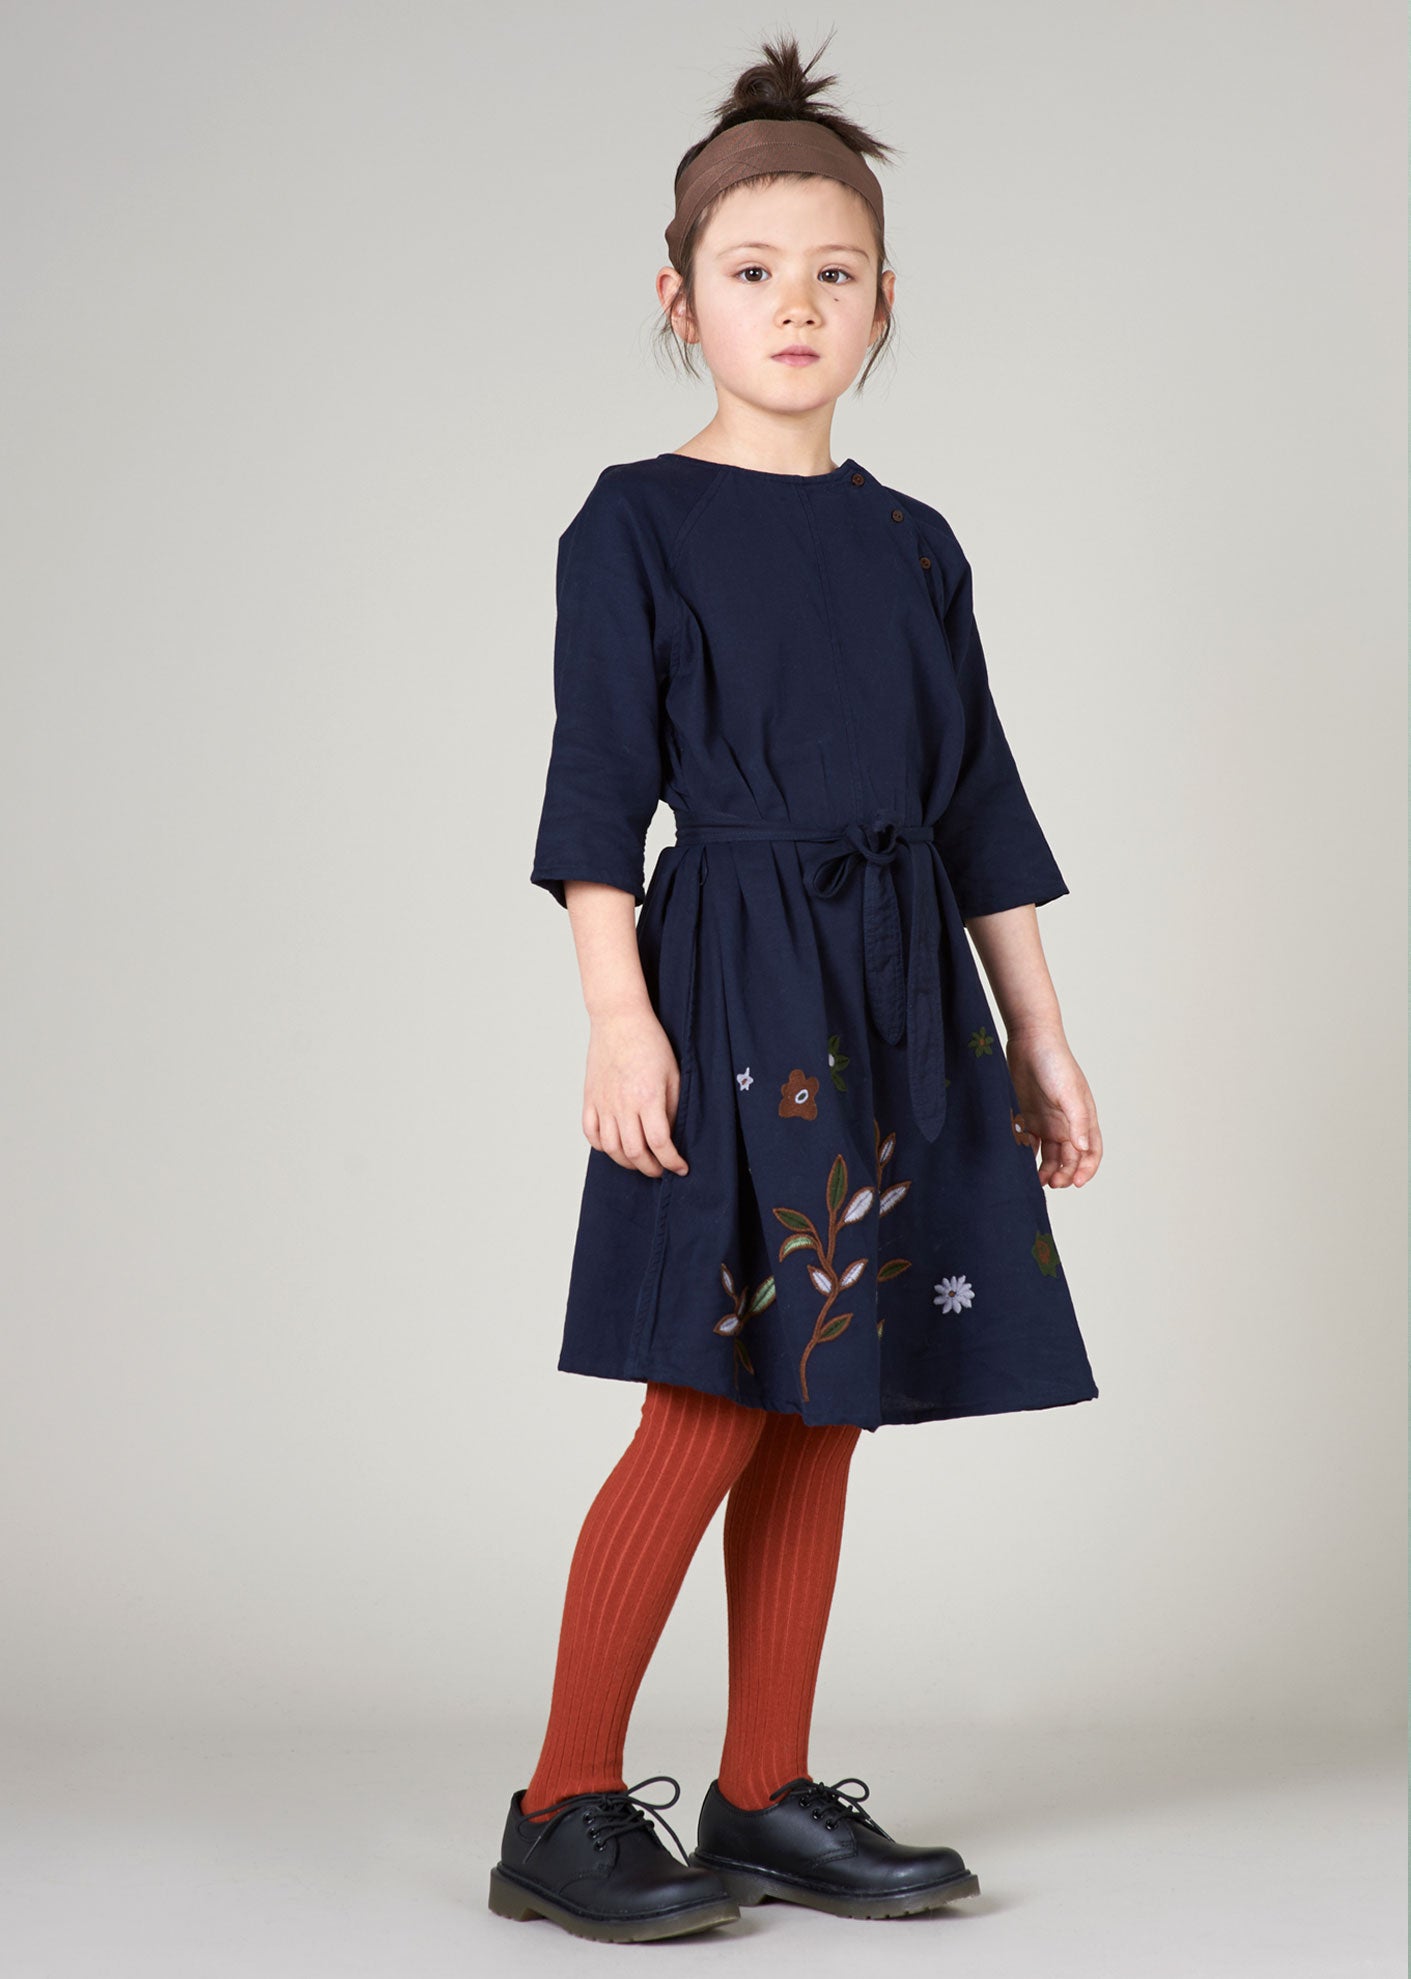 BELSAY EMBROIDERED DRESS - NAVY